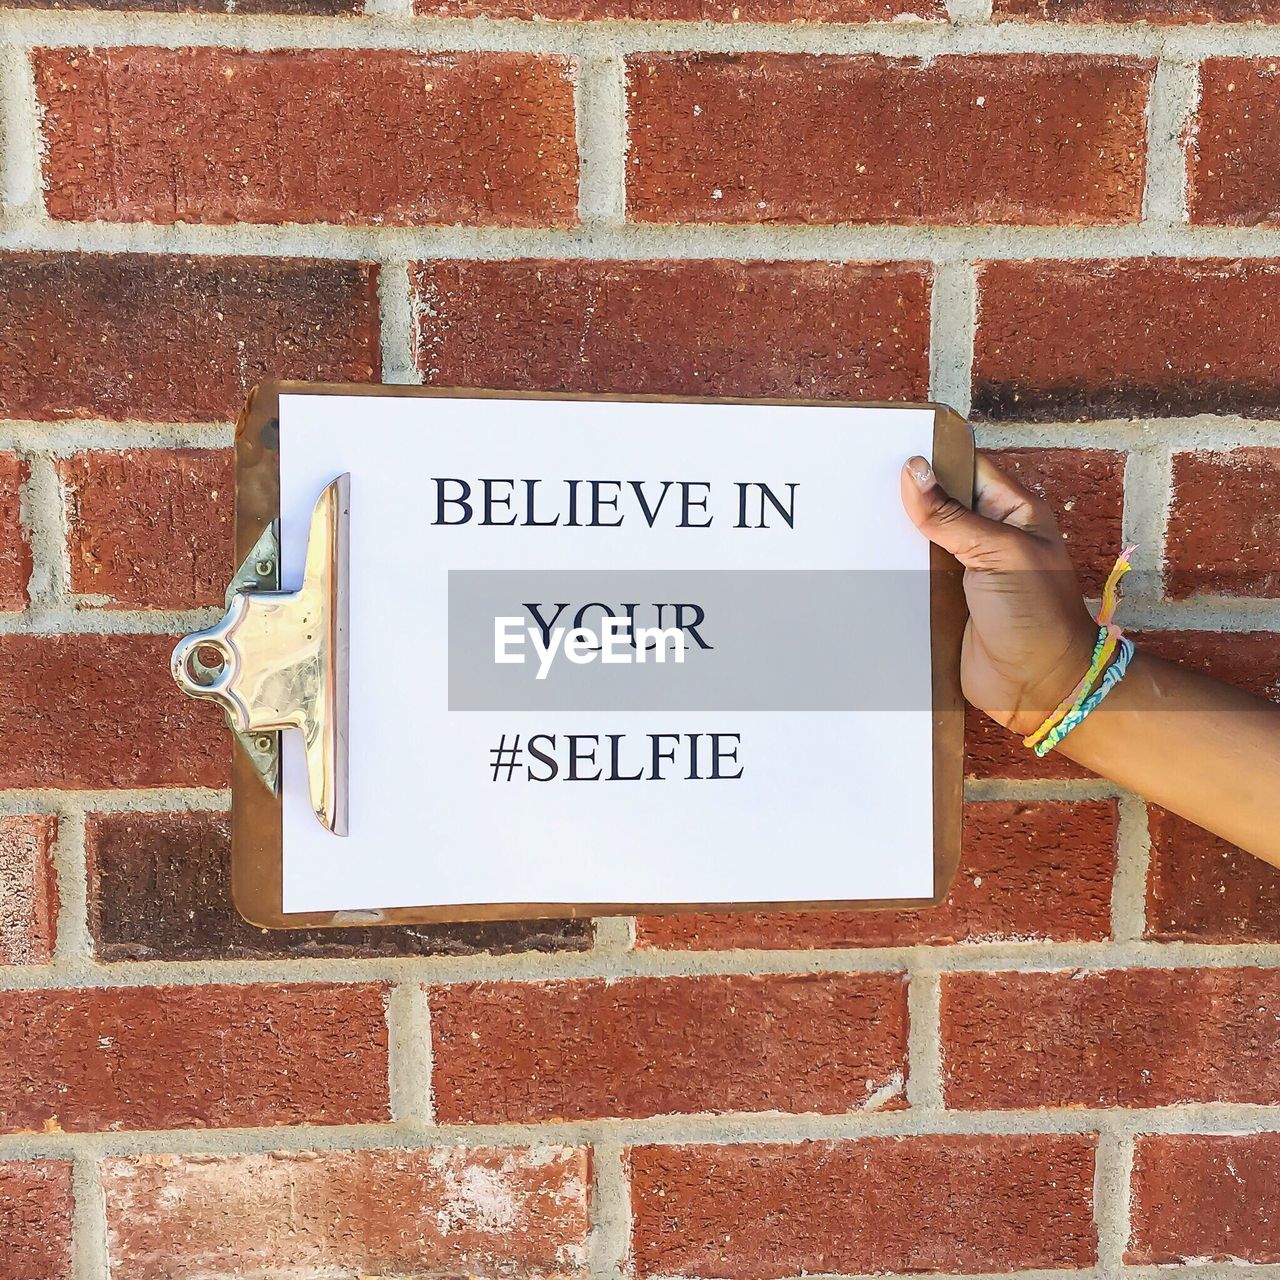 Cropped image of person holding clipboard with text against brick wall